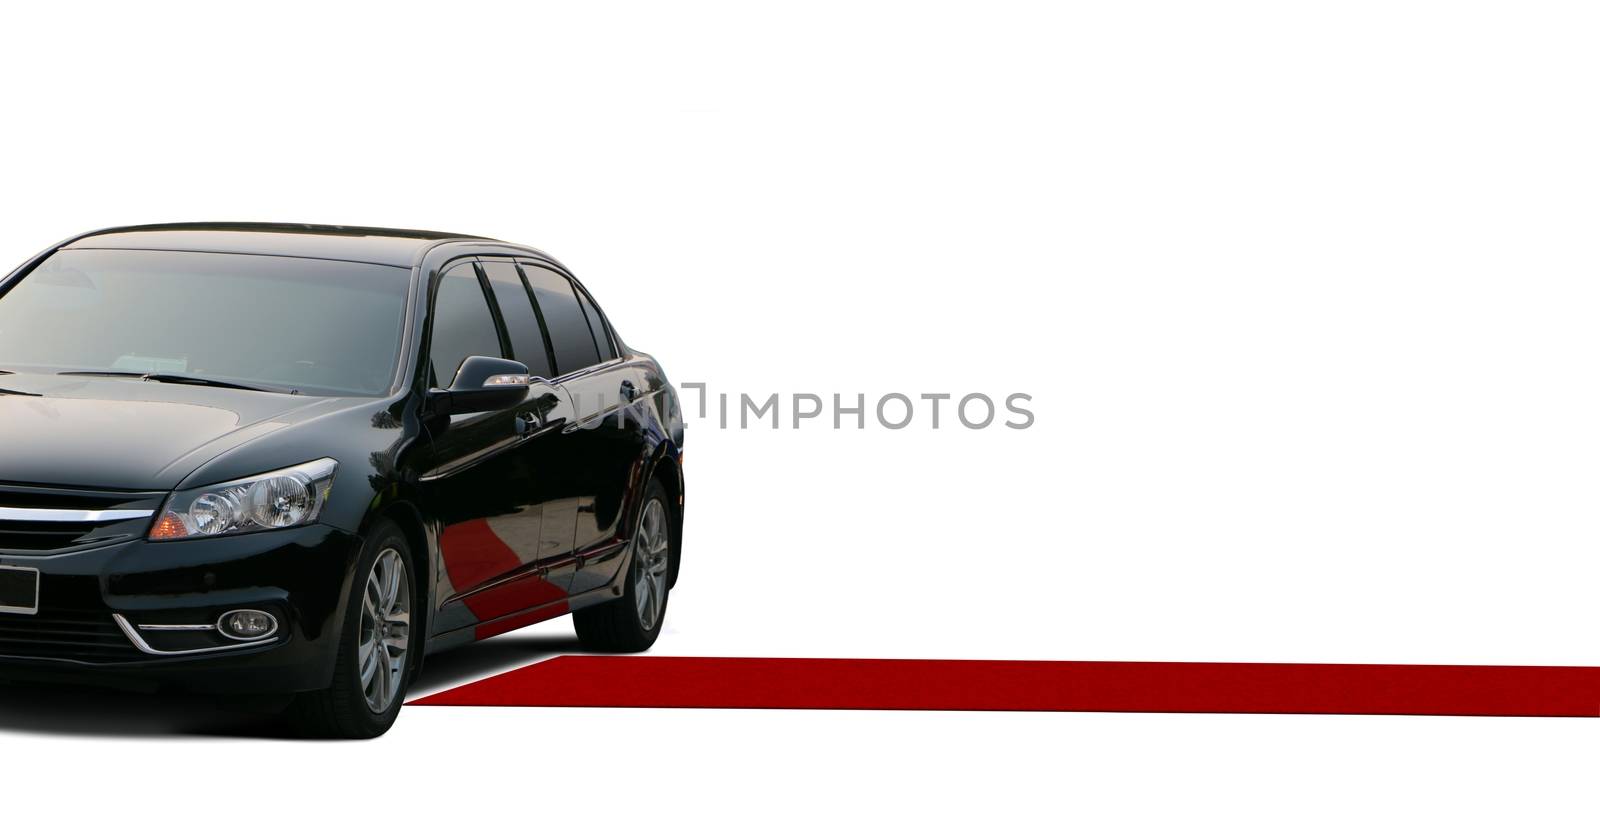 Red carpet and black limousine over white